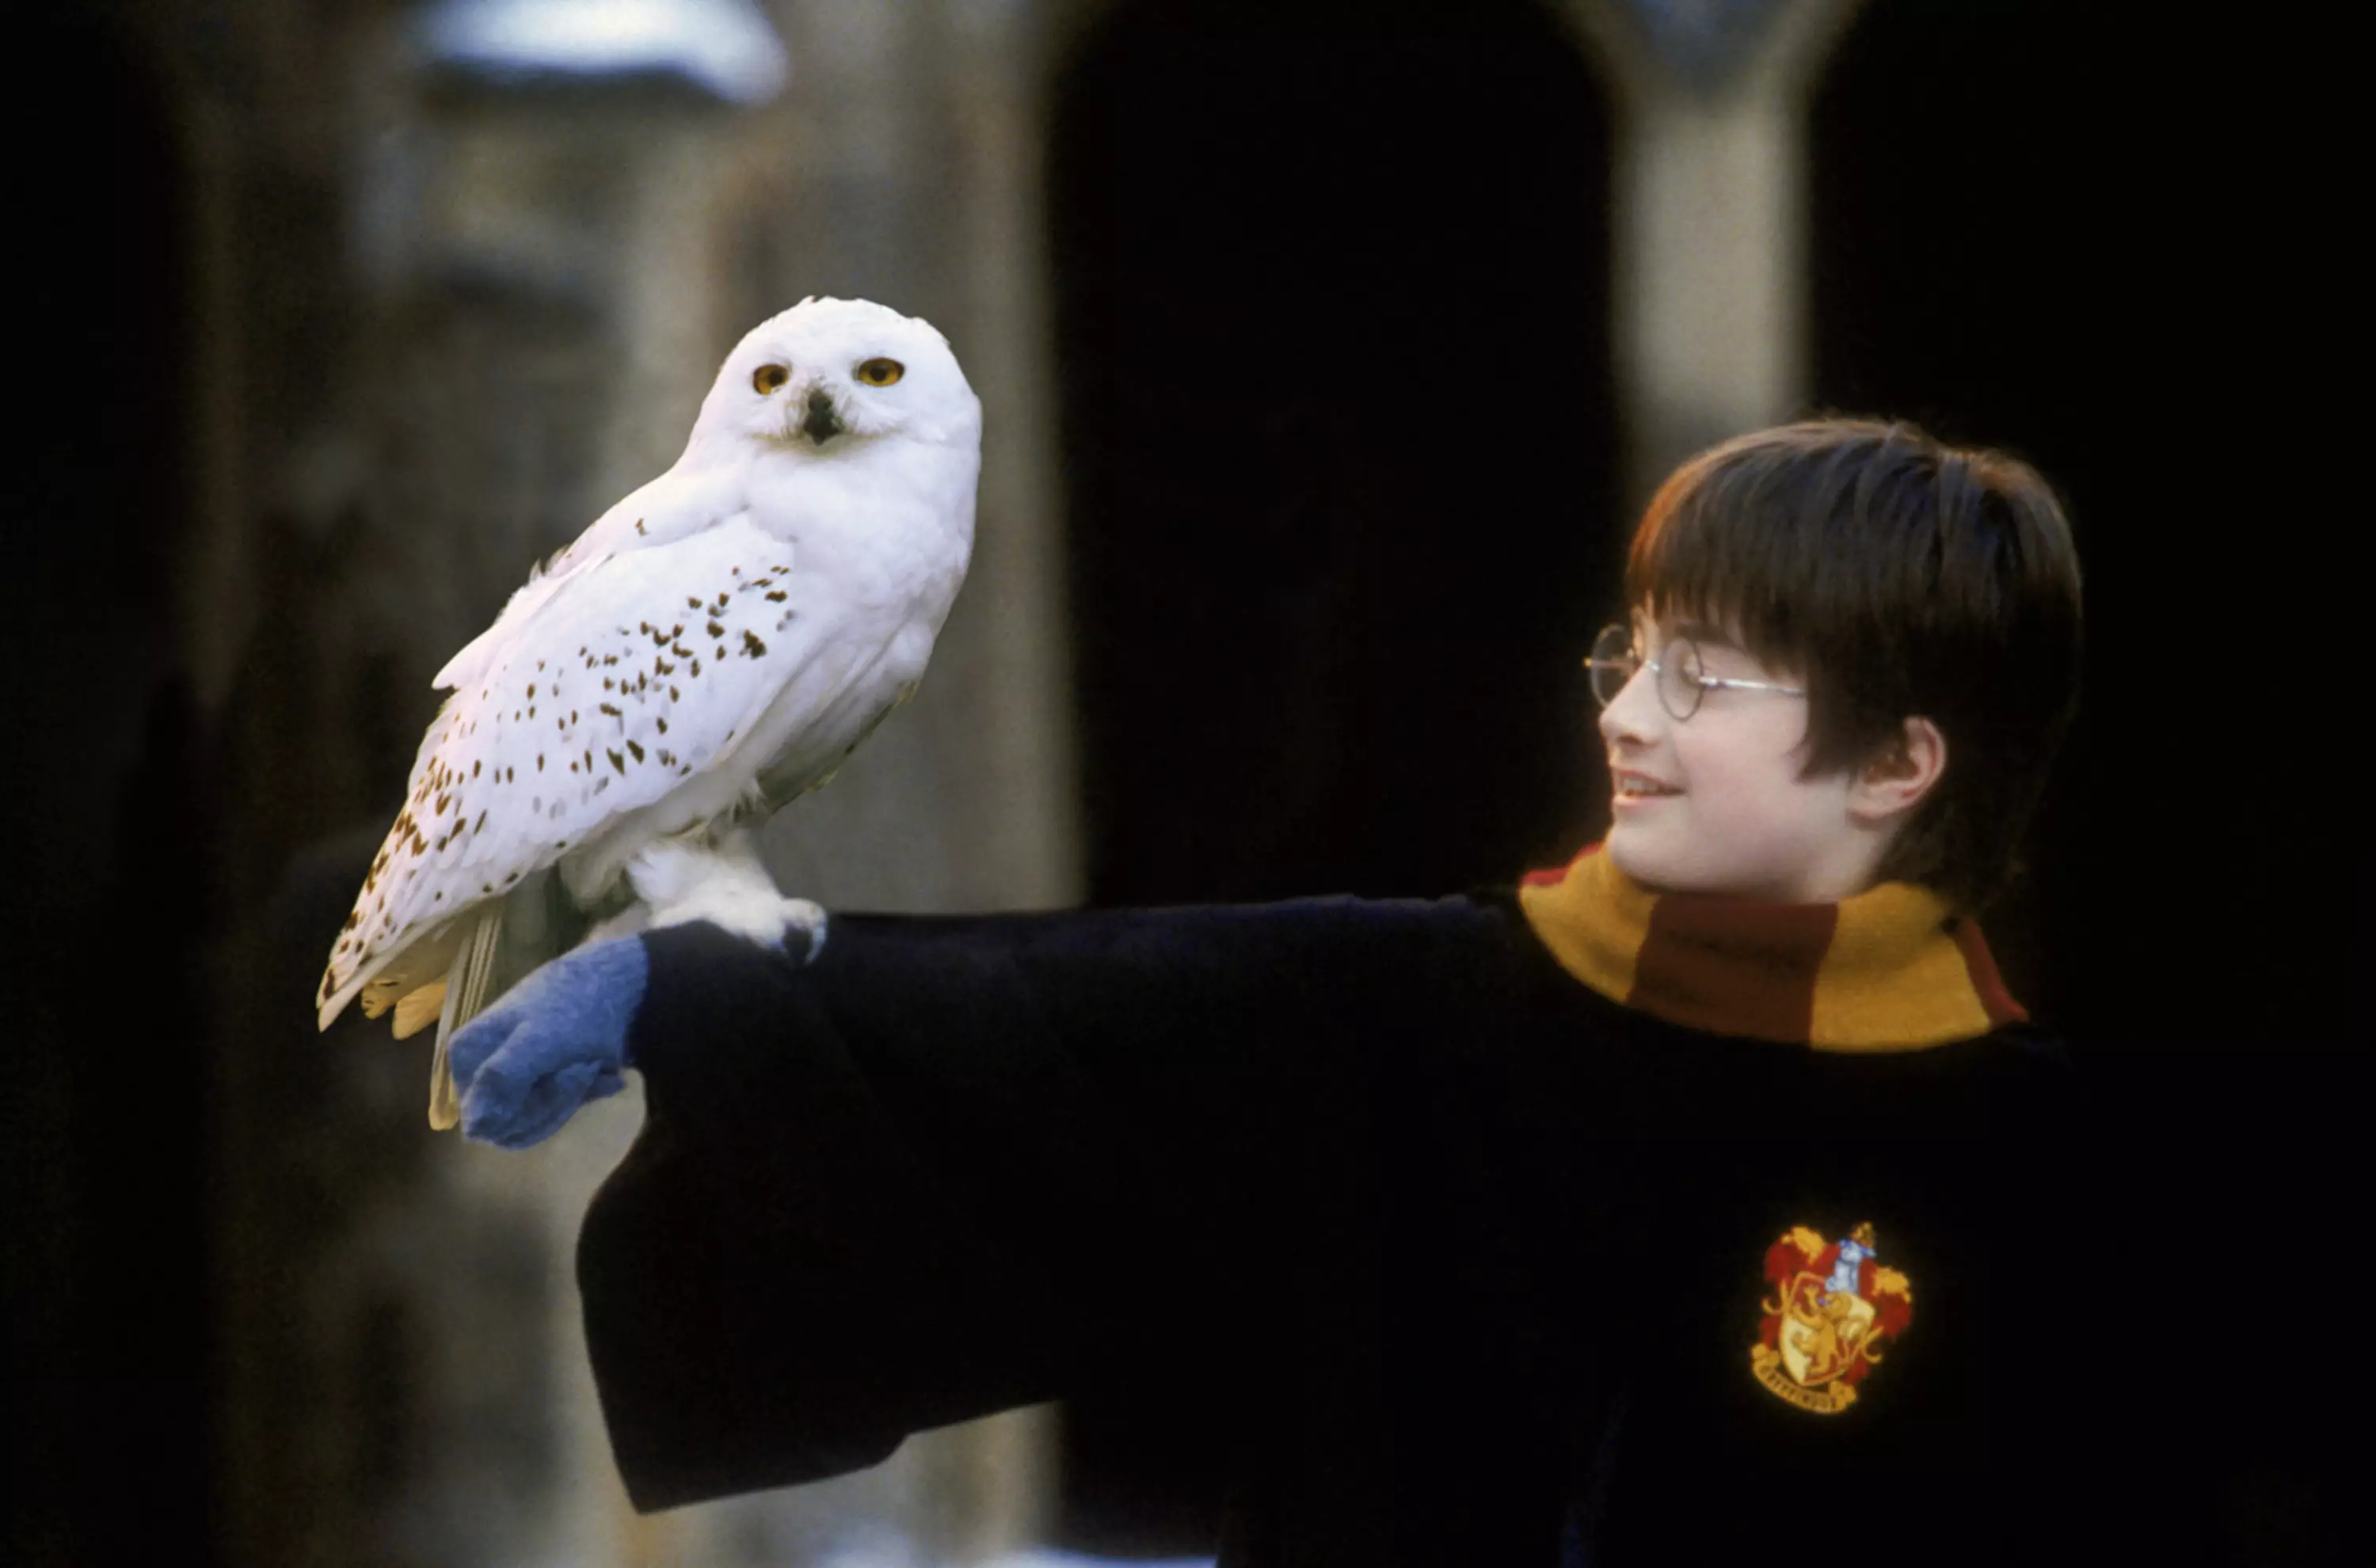 Hedwig is a Harry Potter staple (